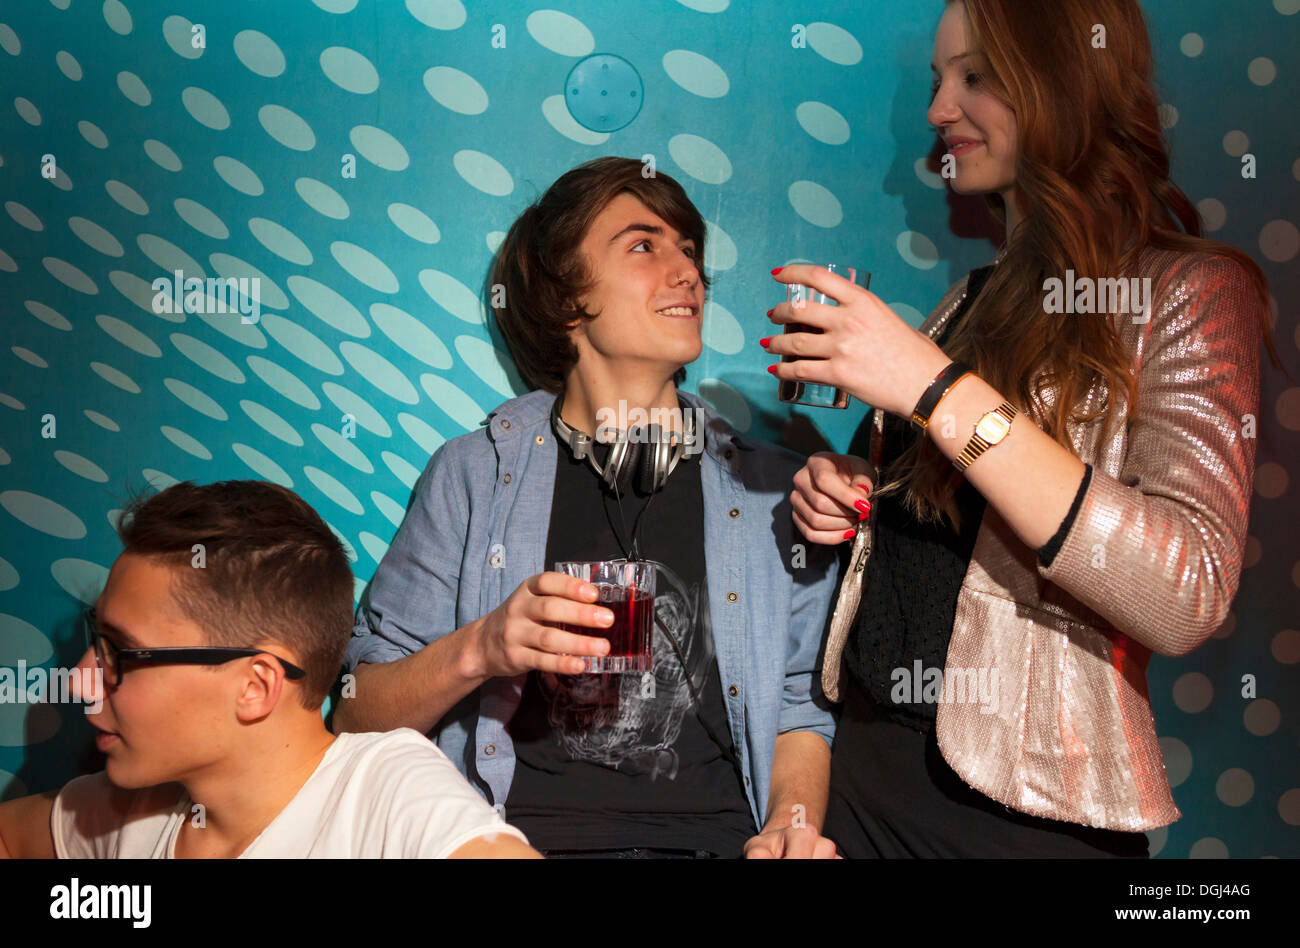 Teenagers holding drinking glasses Stock Photo